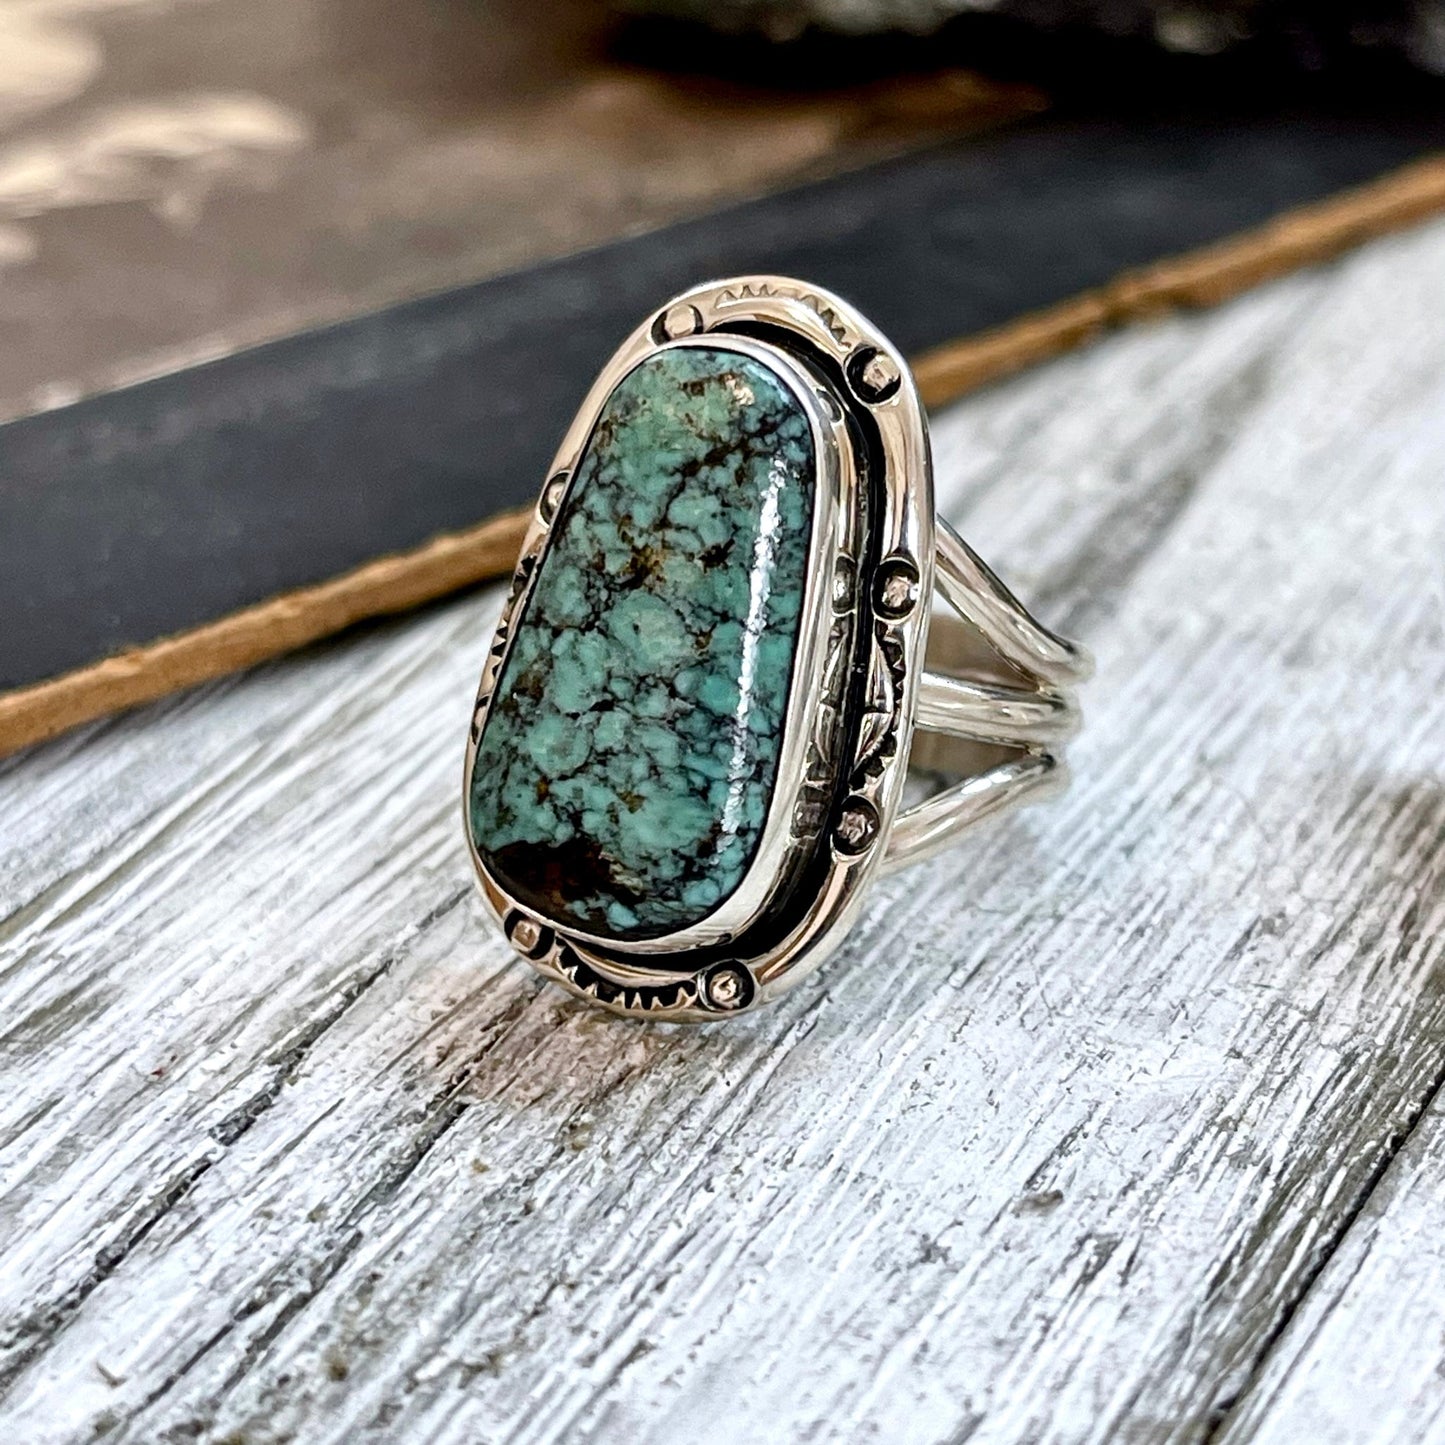 Size 8 Turquoise ( # 8 Turquoise) Statement Ring Set in Sterling Silver / Curated by FOXLARK Collection